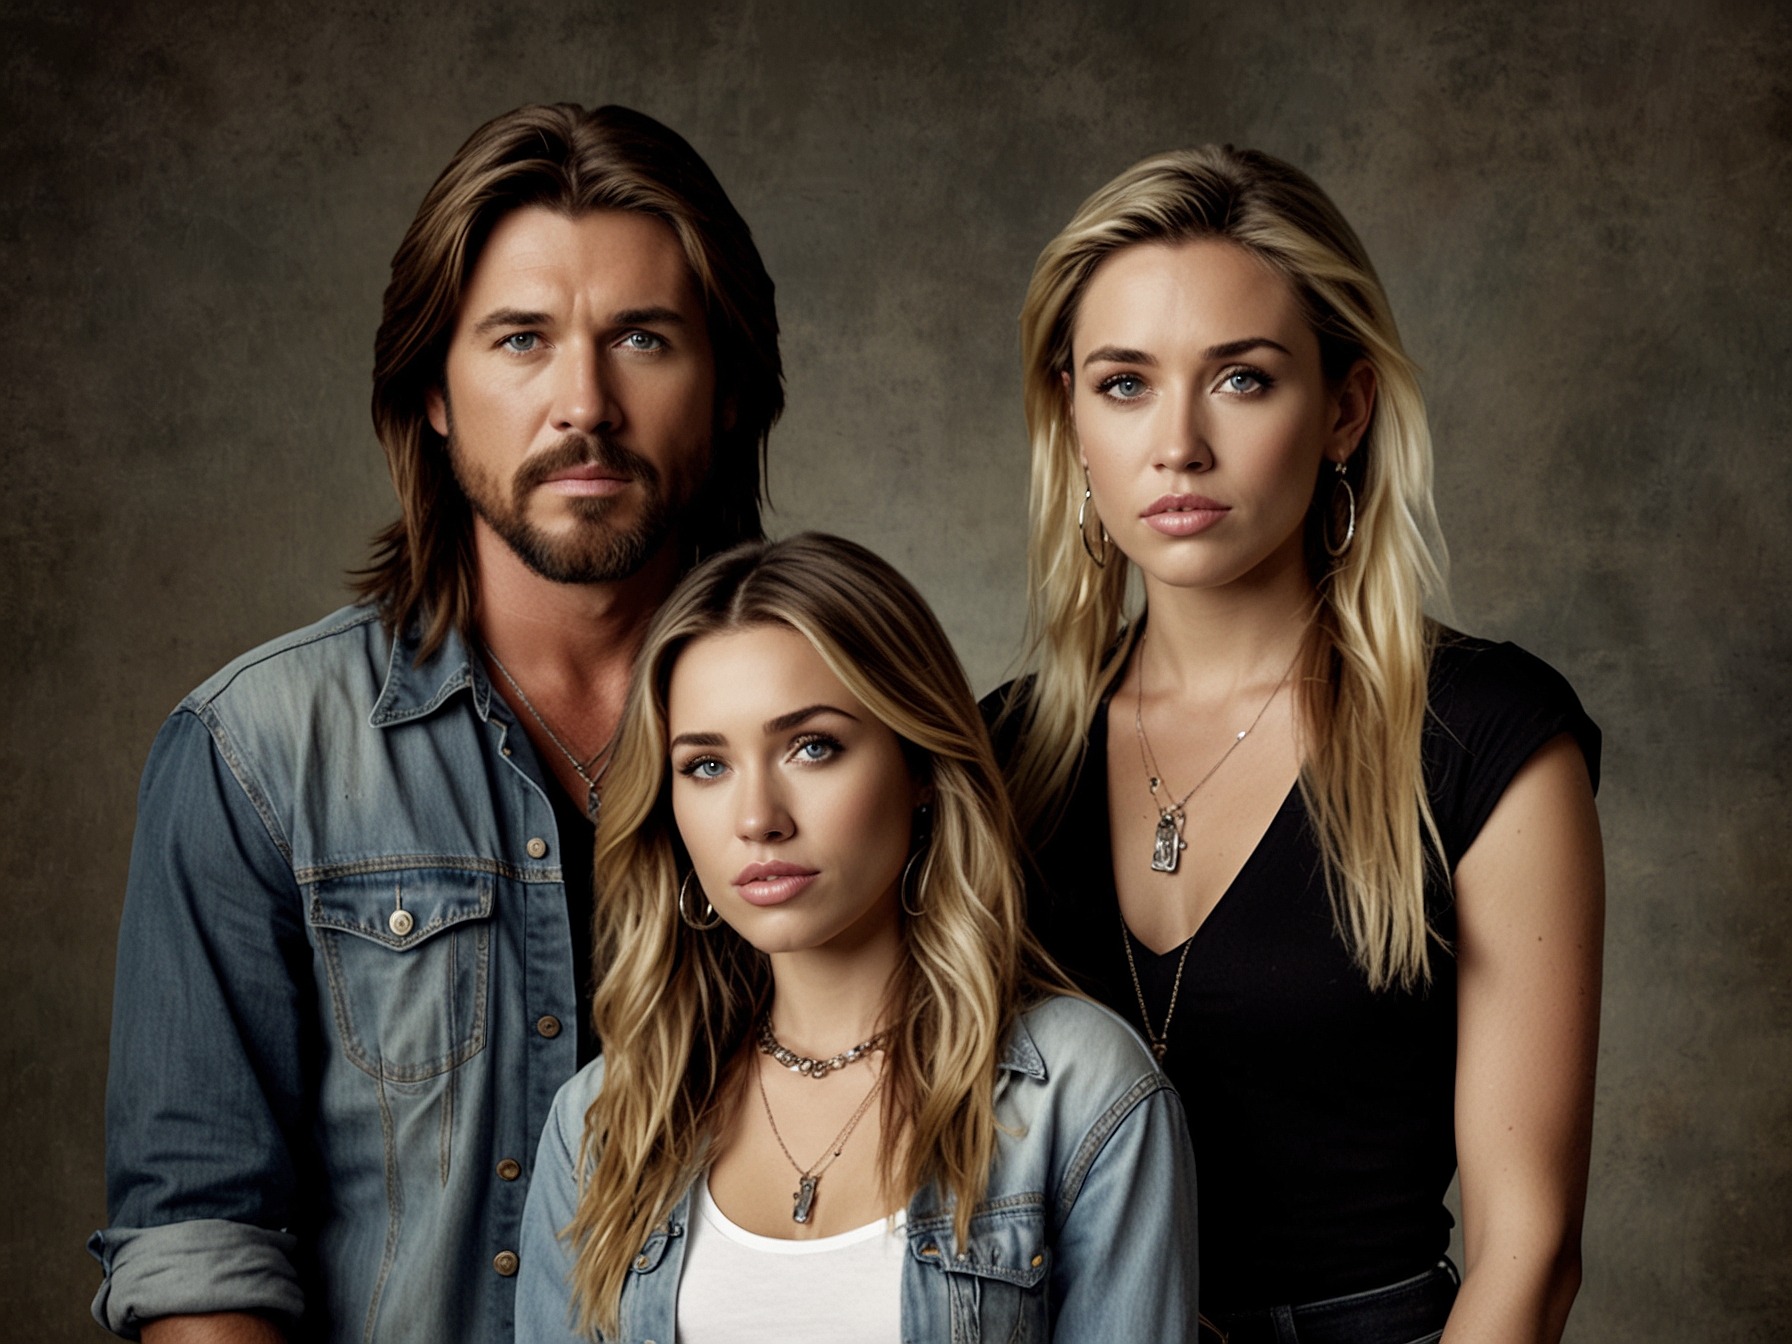 A tense family portrait of Billy Ray Cyrus, Miley Cyrus, and Tish Cyrus, highlighting the emotional strain and conflicts that contributed to their high-profile divorce.